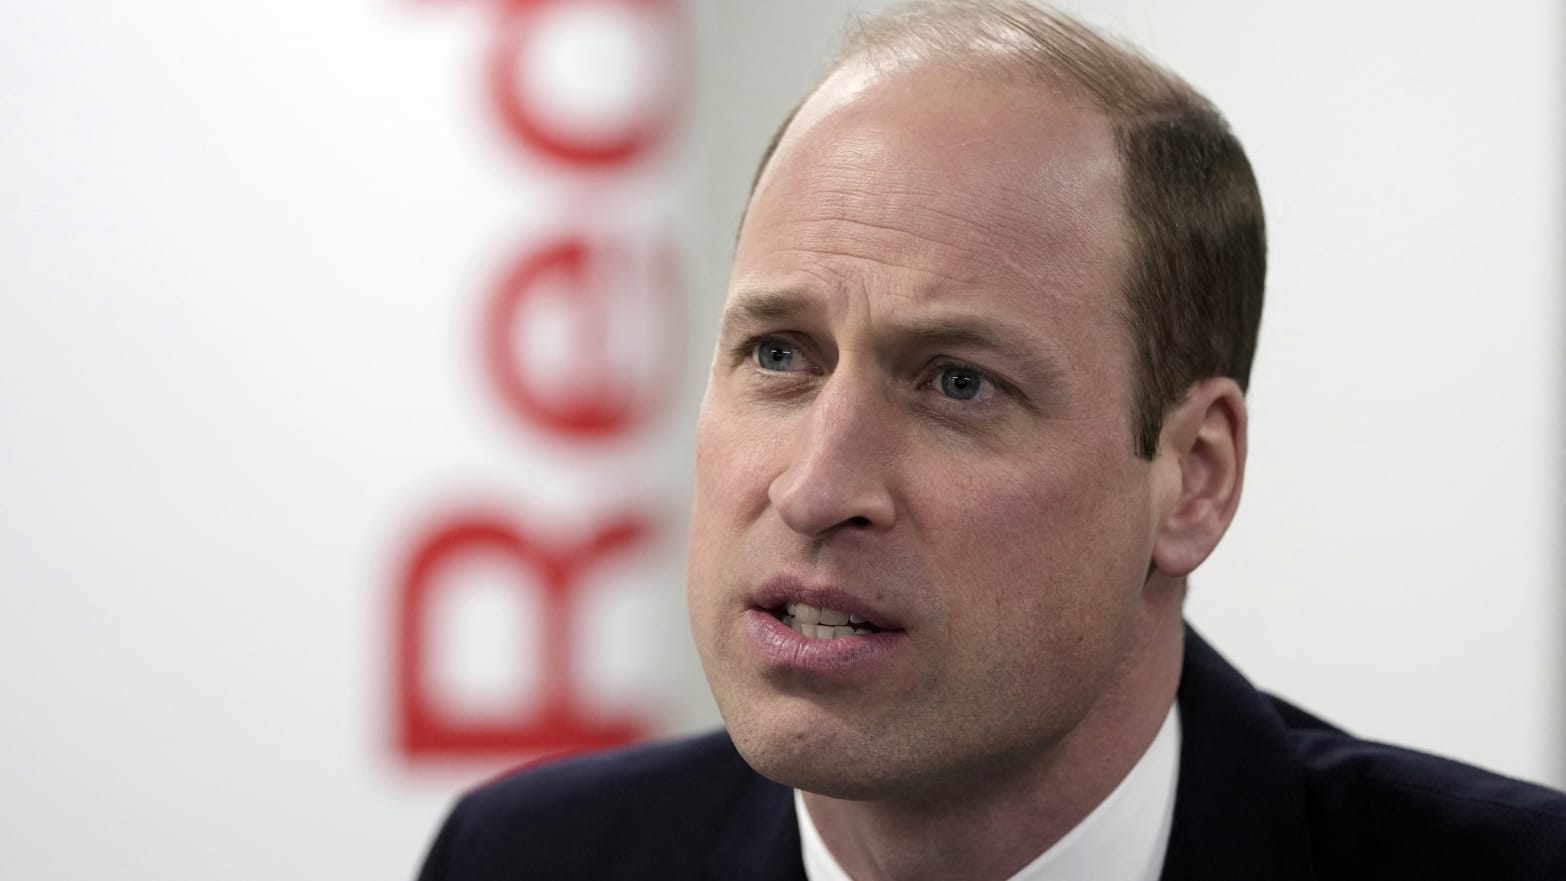 Prince William, Prince of Wales reacts during a visit to the British Red Cross' headquarters in London on February 20, 2024.